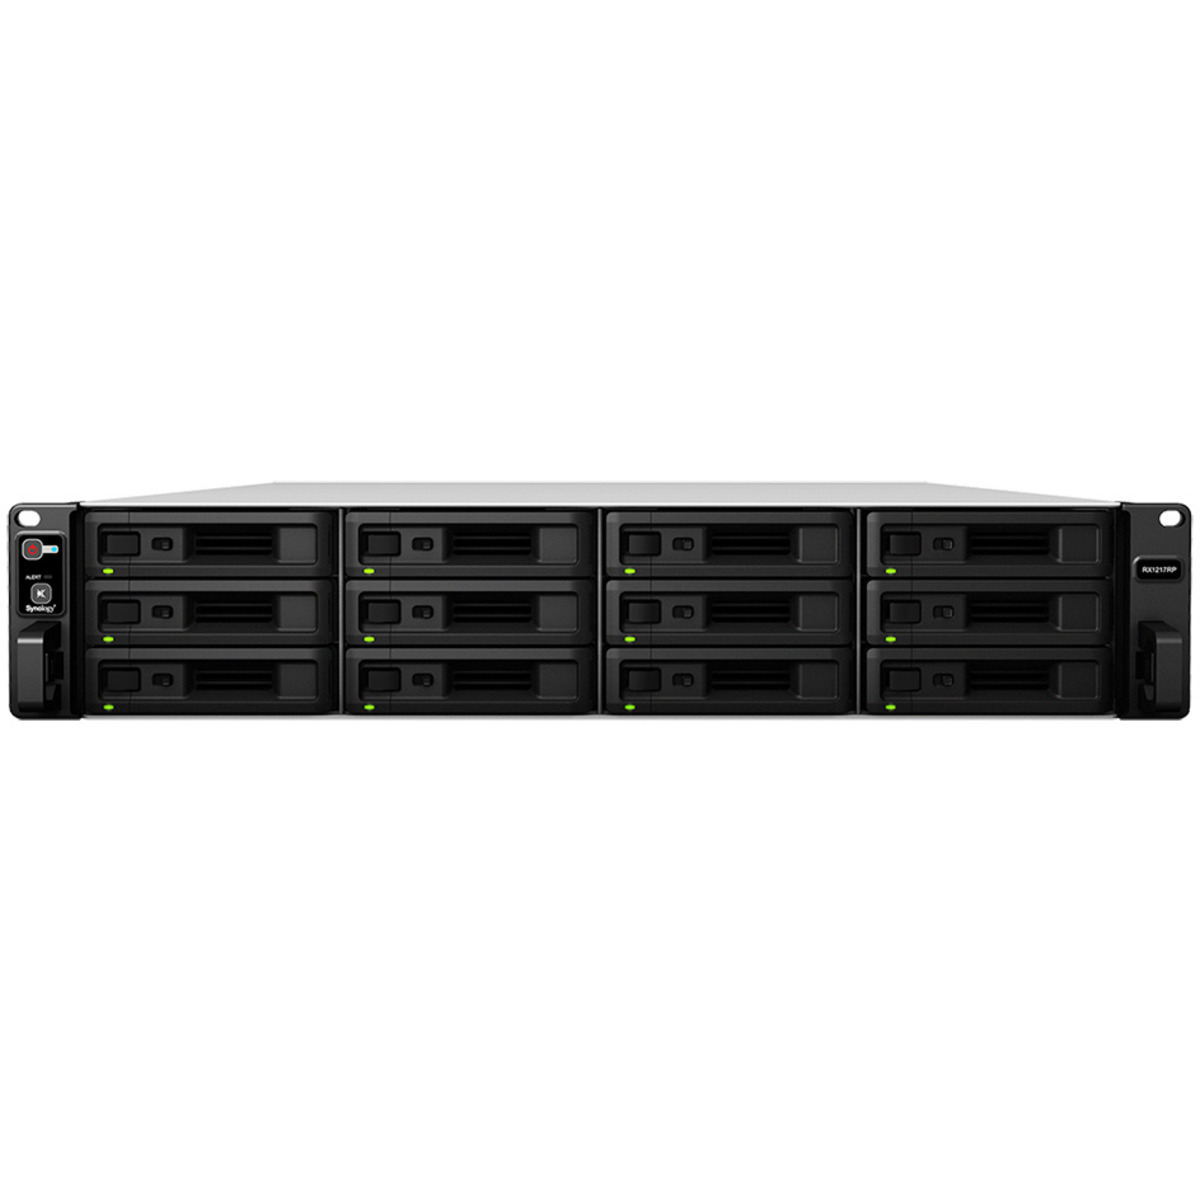 Synology RX1217 External Expansion Drive 16tb 12-Bay RackMount Large Business / Enterprise Expansion Enclosure 8x2tb Crucial MX500 CT2000MX500SSD1 2.5 560/510MB/s SATA 6Gb/s SSD CONSUMER Class Drives Installed - Burn-In Tested RX1217 External Expansion Drive